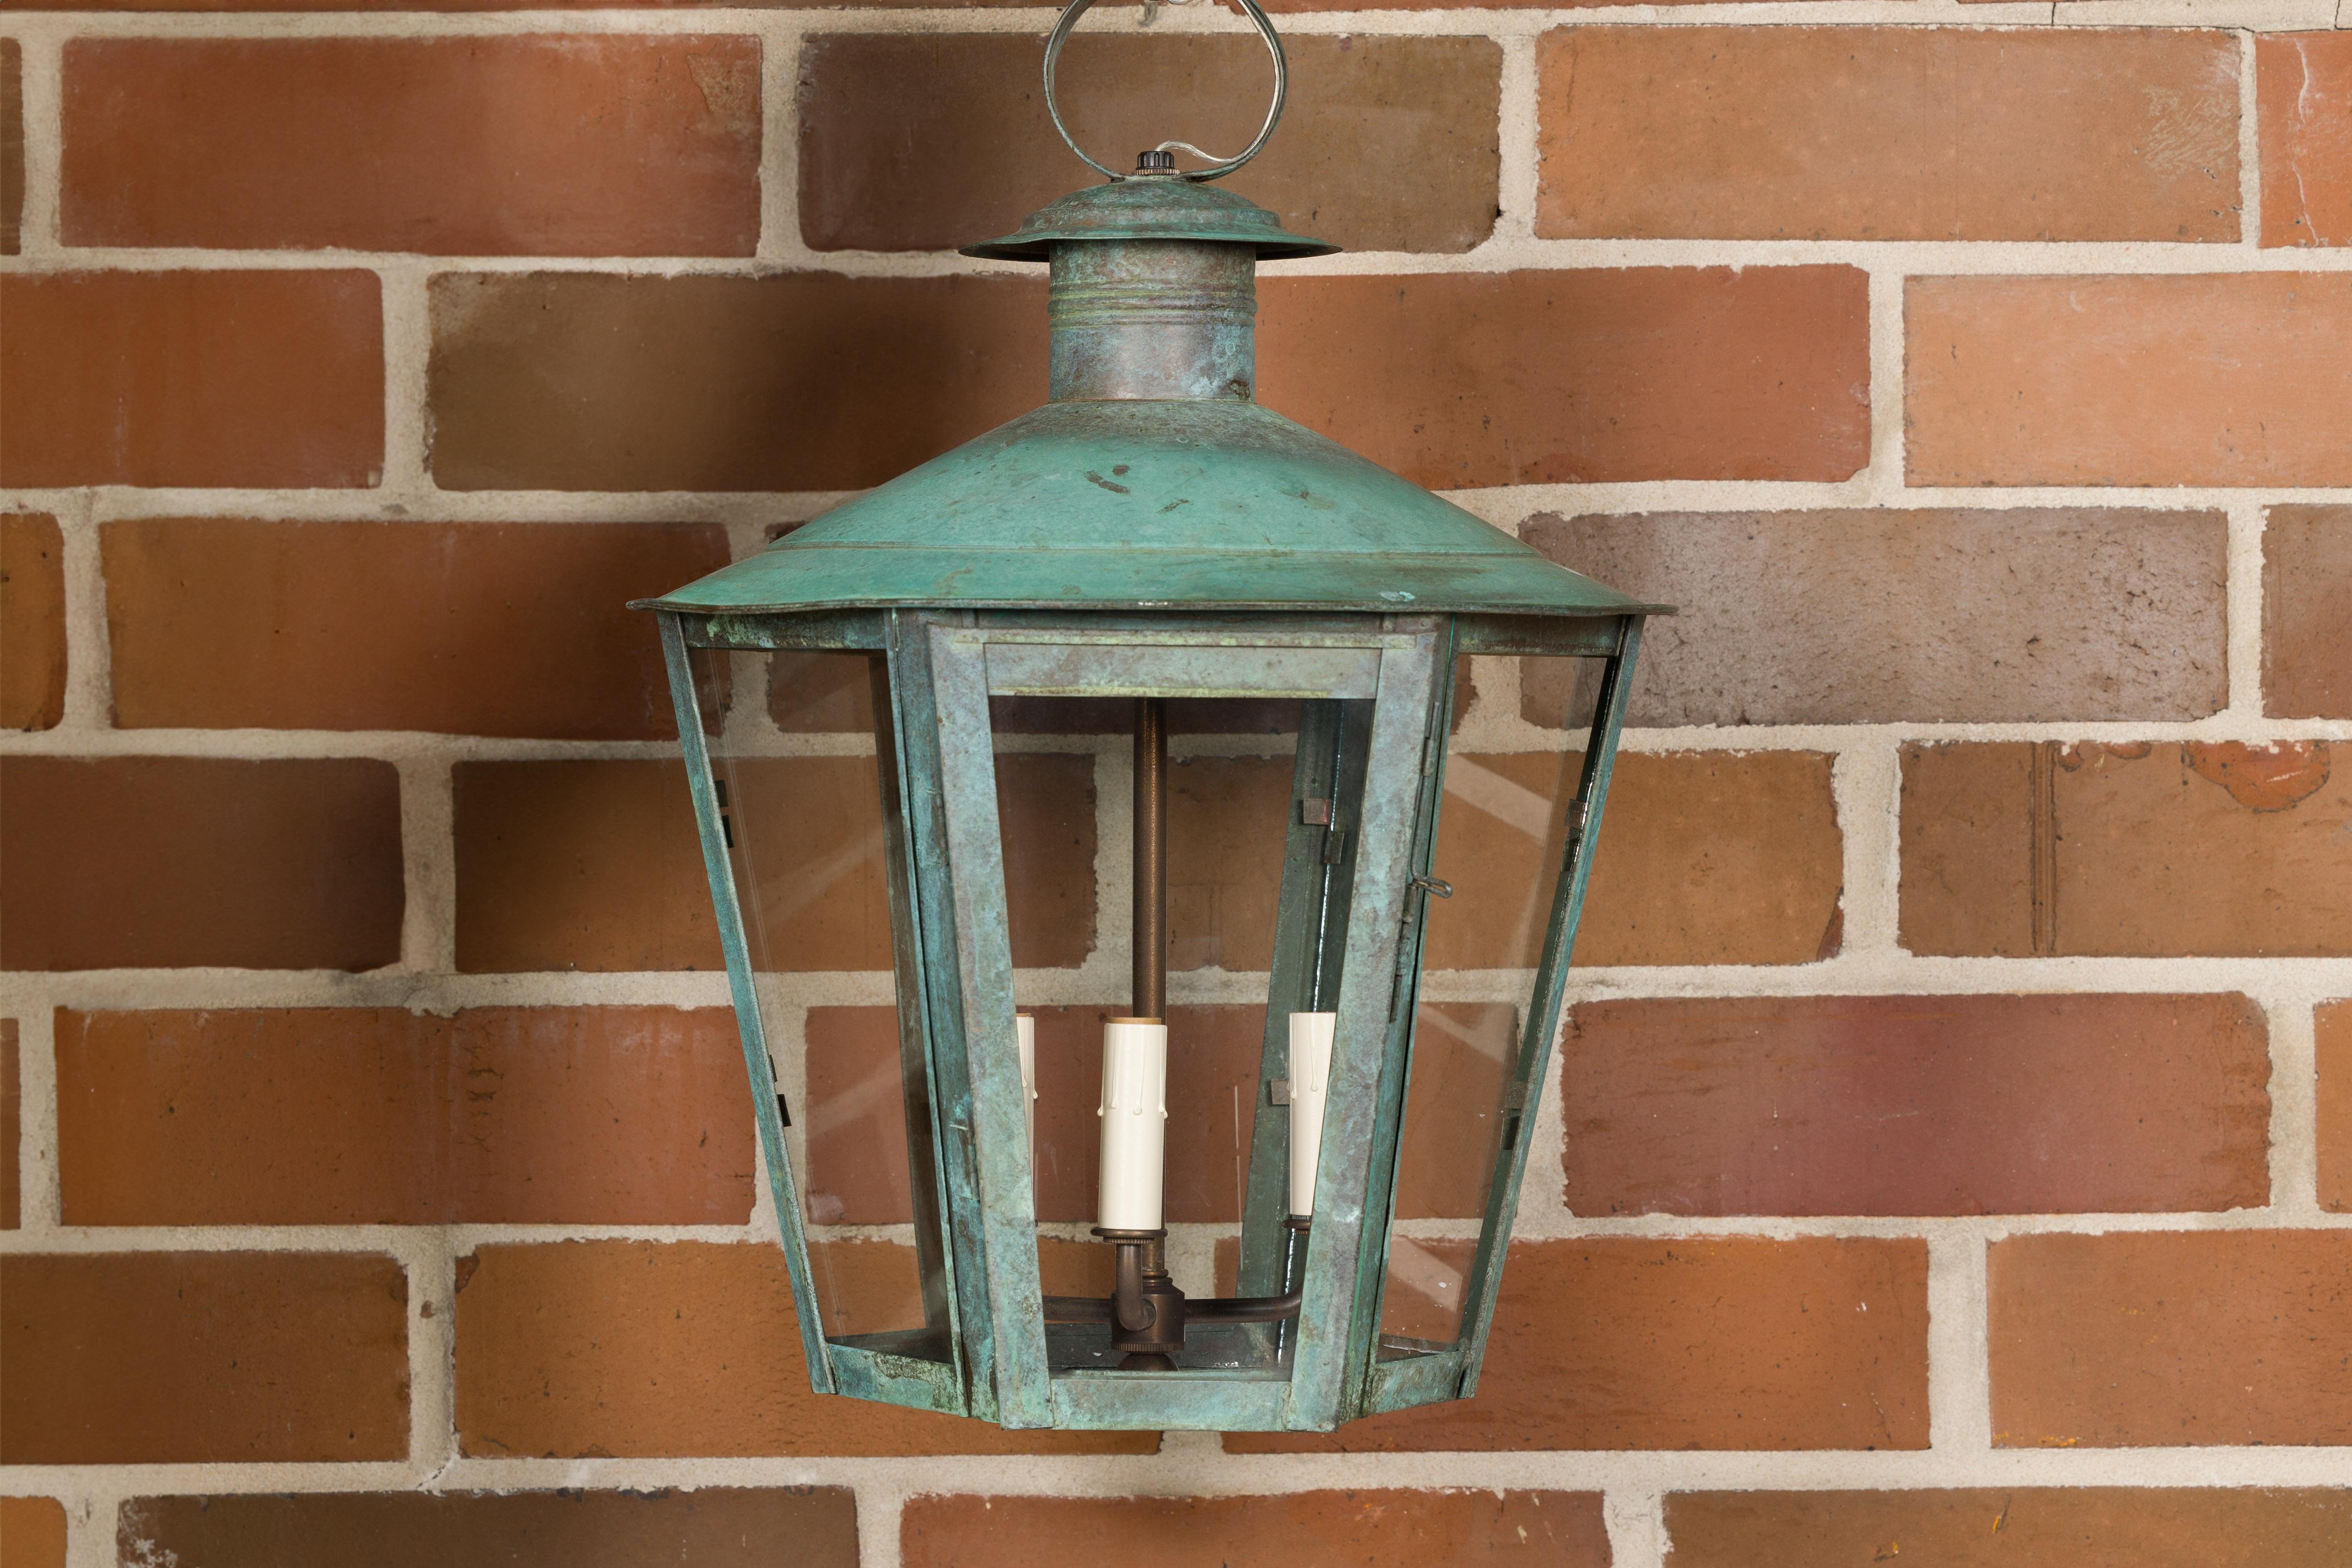 An English Victorian period copper lantern from the 19th century with three lights and glass panels. This exquisite English Victorian copper lantern, dating back to the 19th century, is a captivating blend of timeless elegance and functional design.